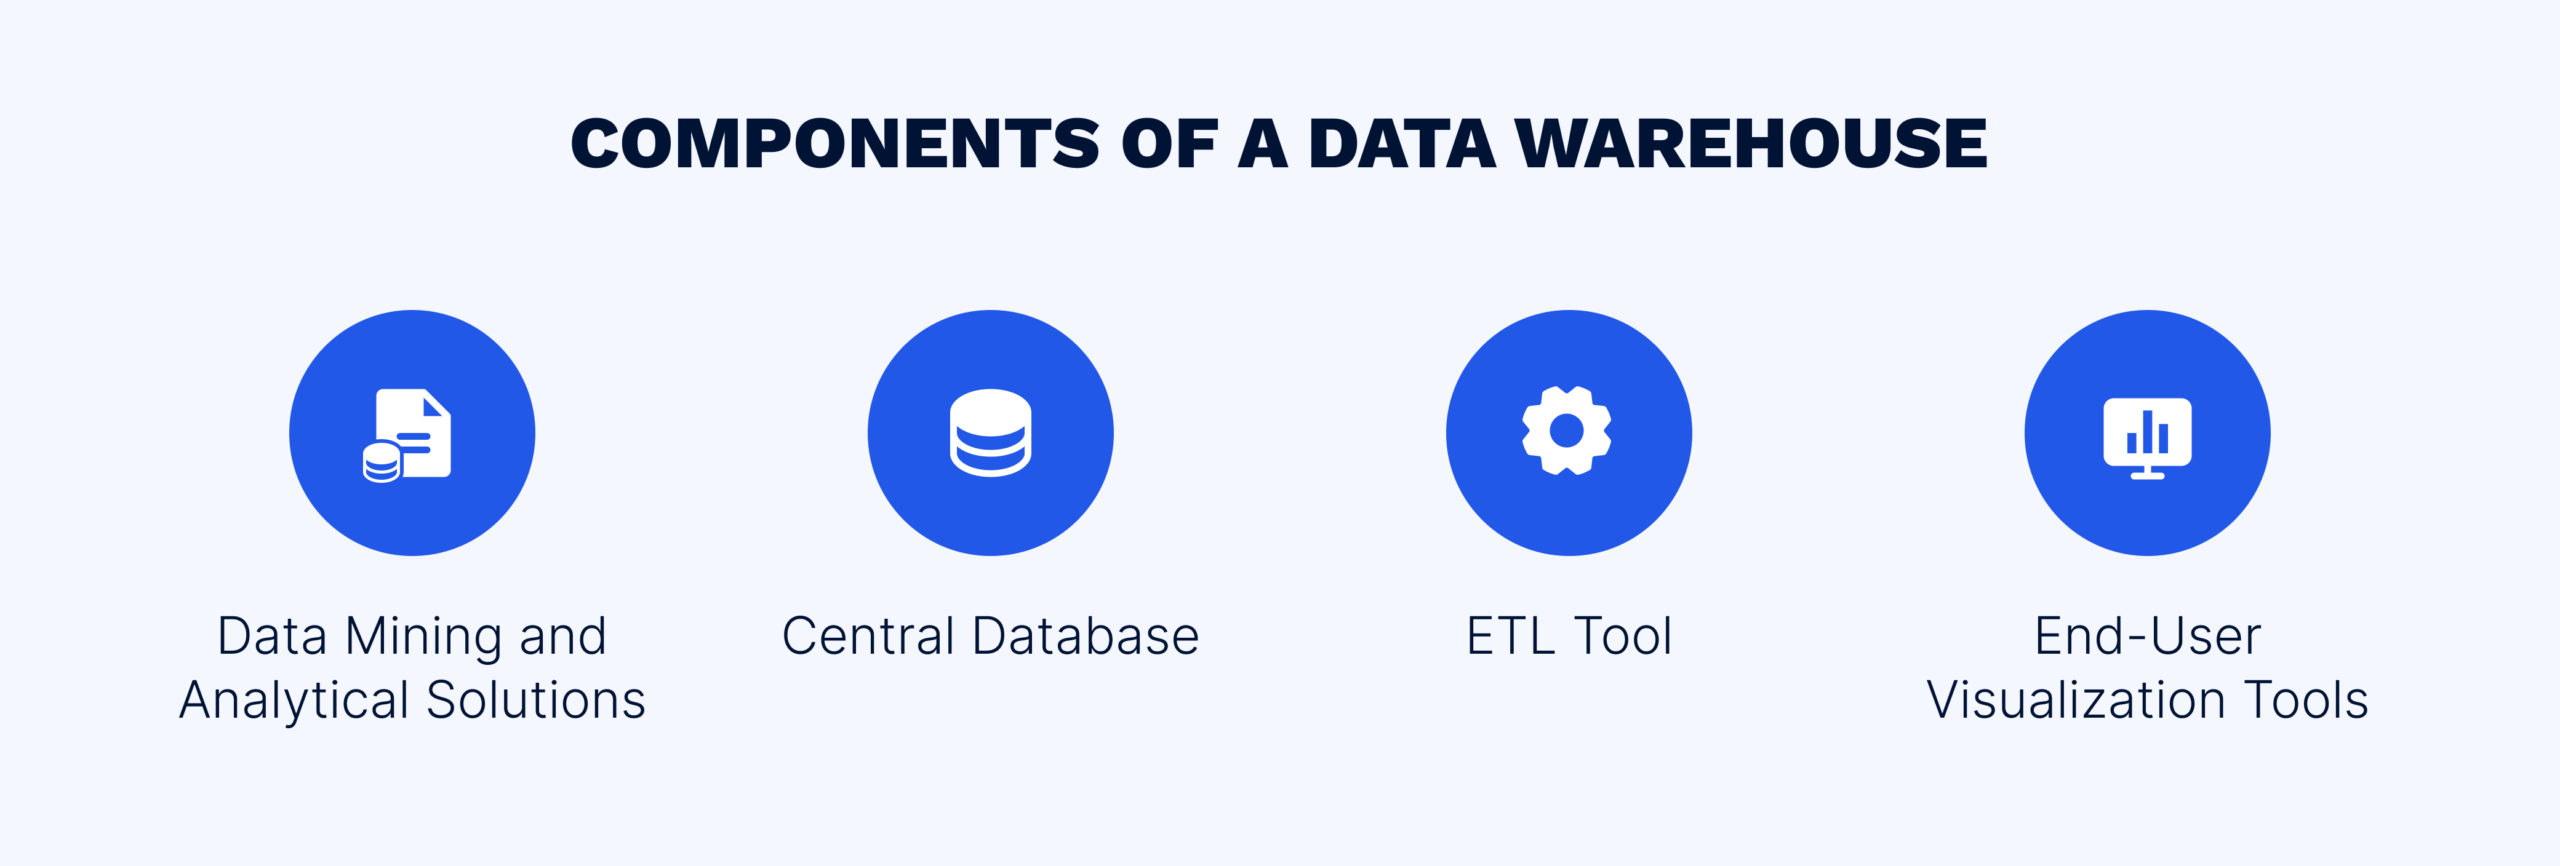 Key components of a data warehouse